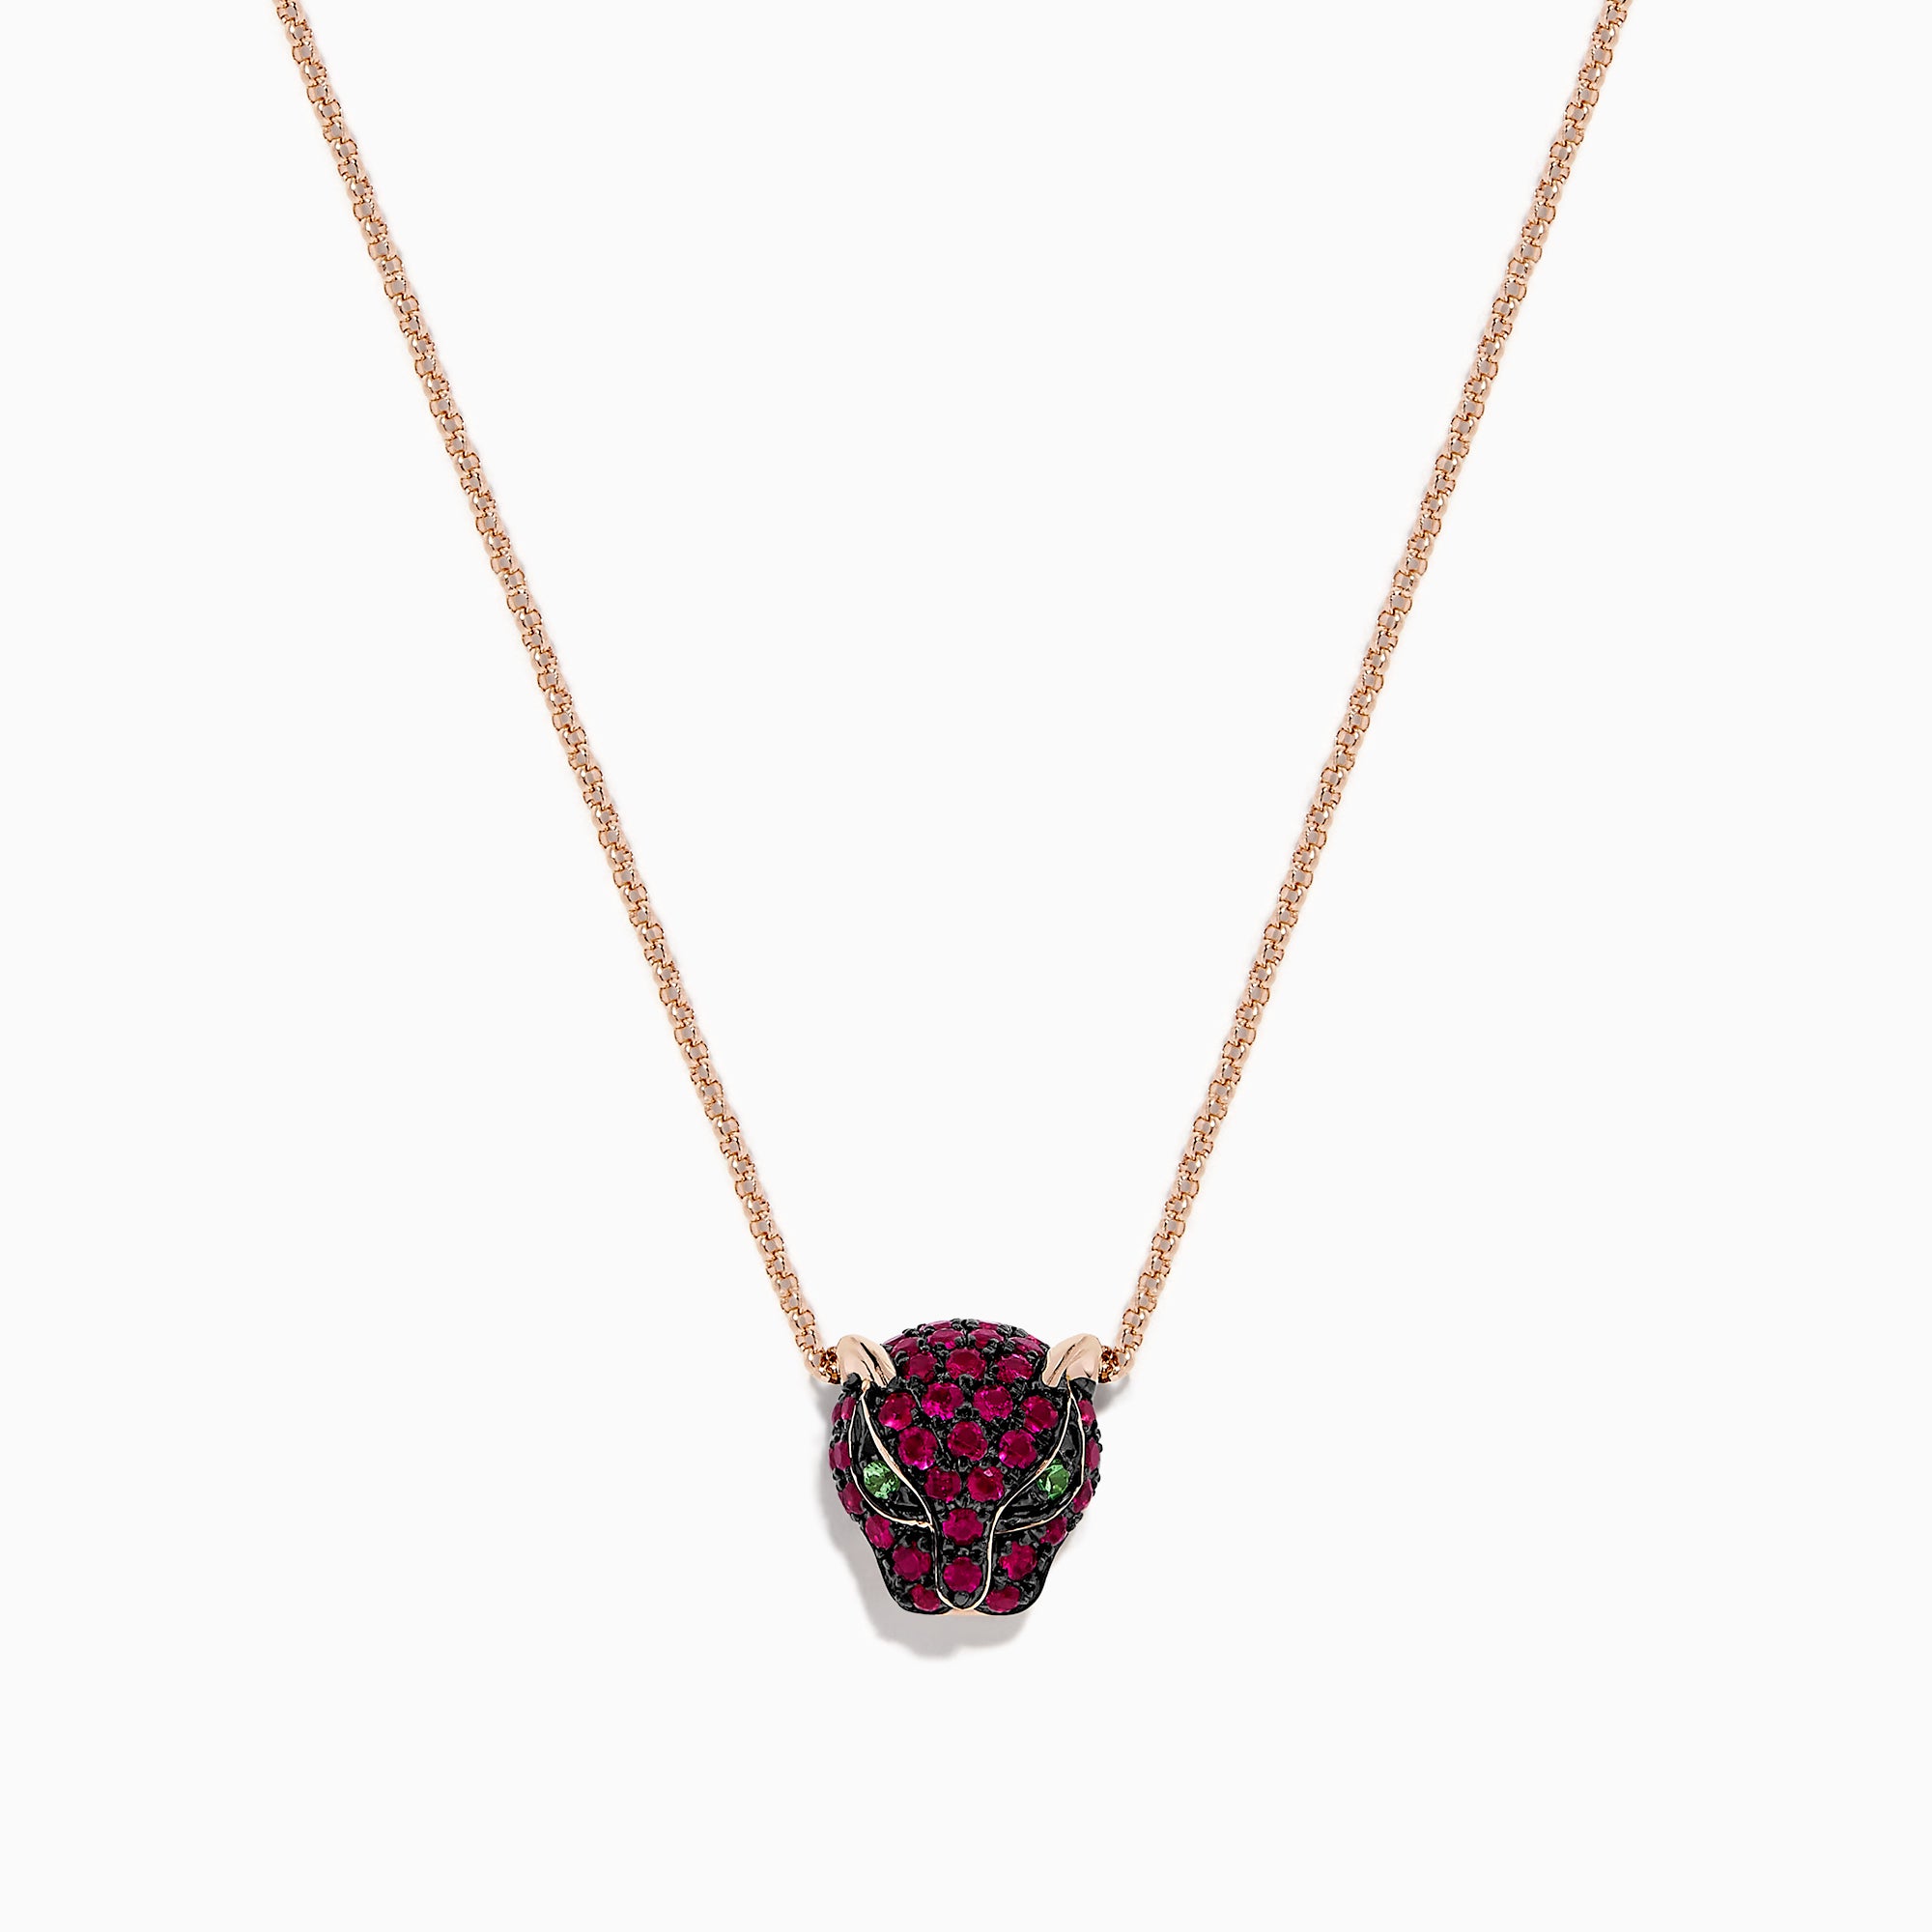 Effy Signature 14K Rose Gold Ruby and Tsavorite Panther Necklace, 0.52 TCW